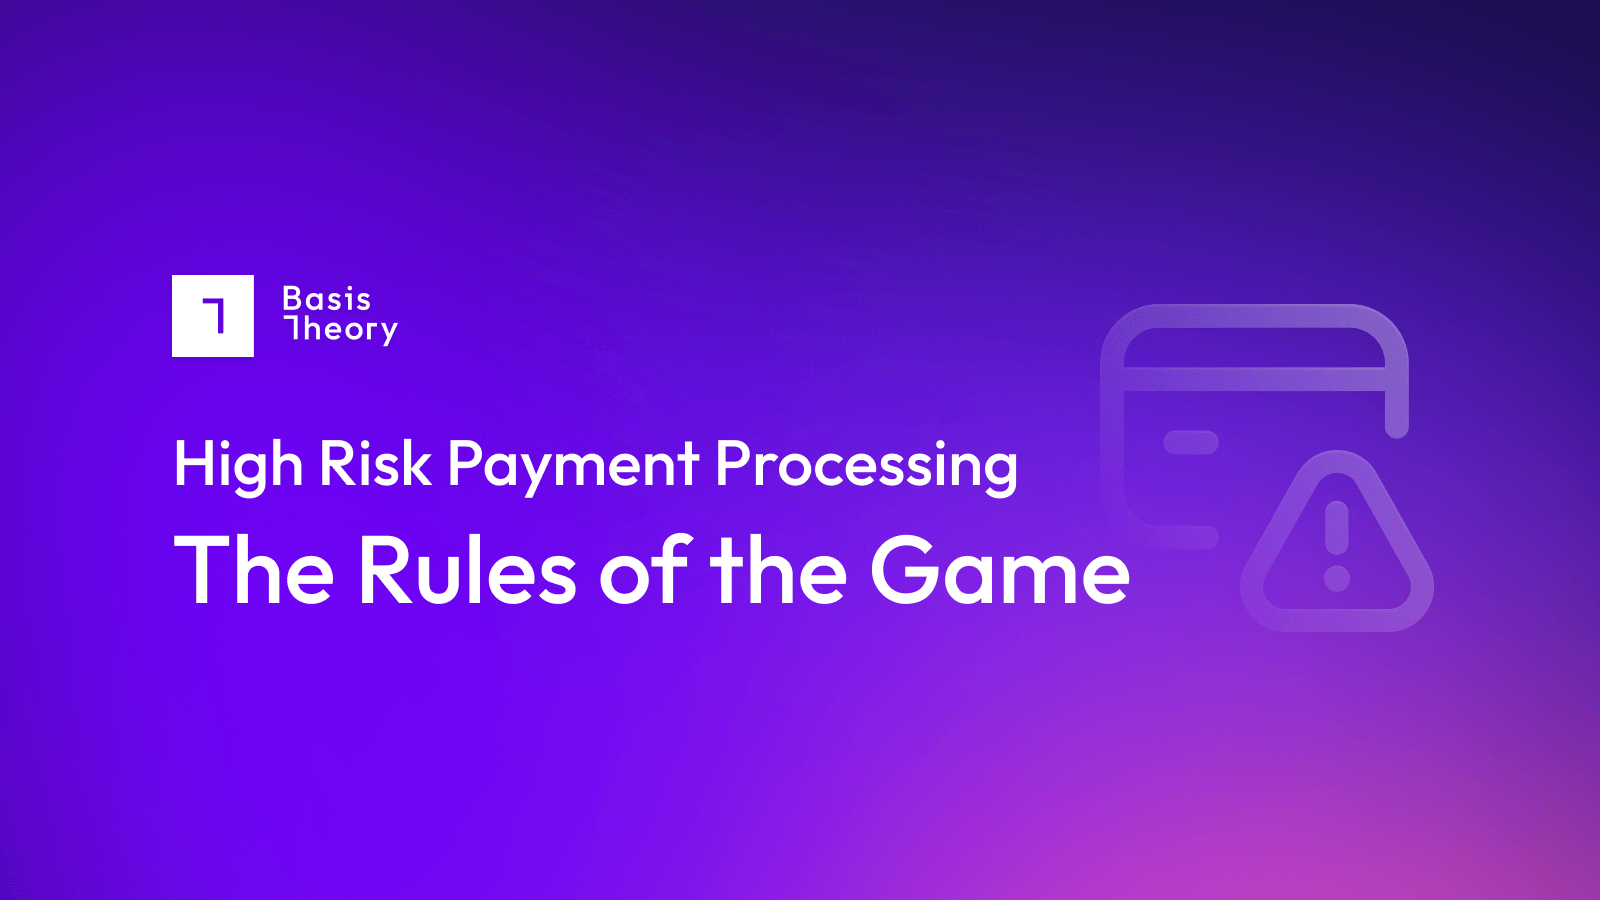 High risk payment processing - rules of the game